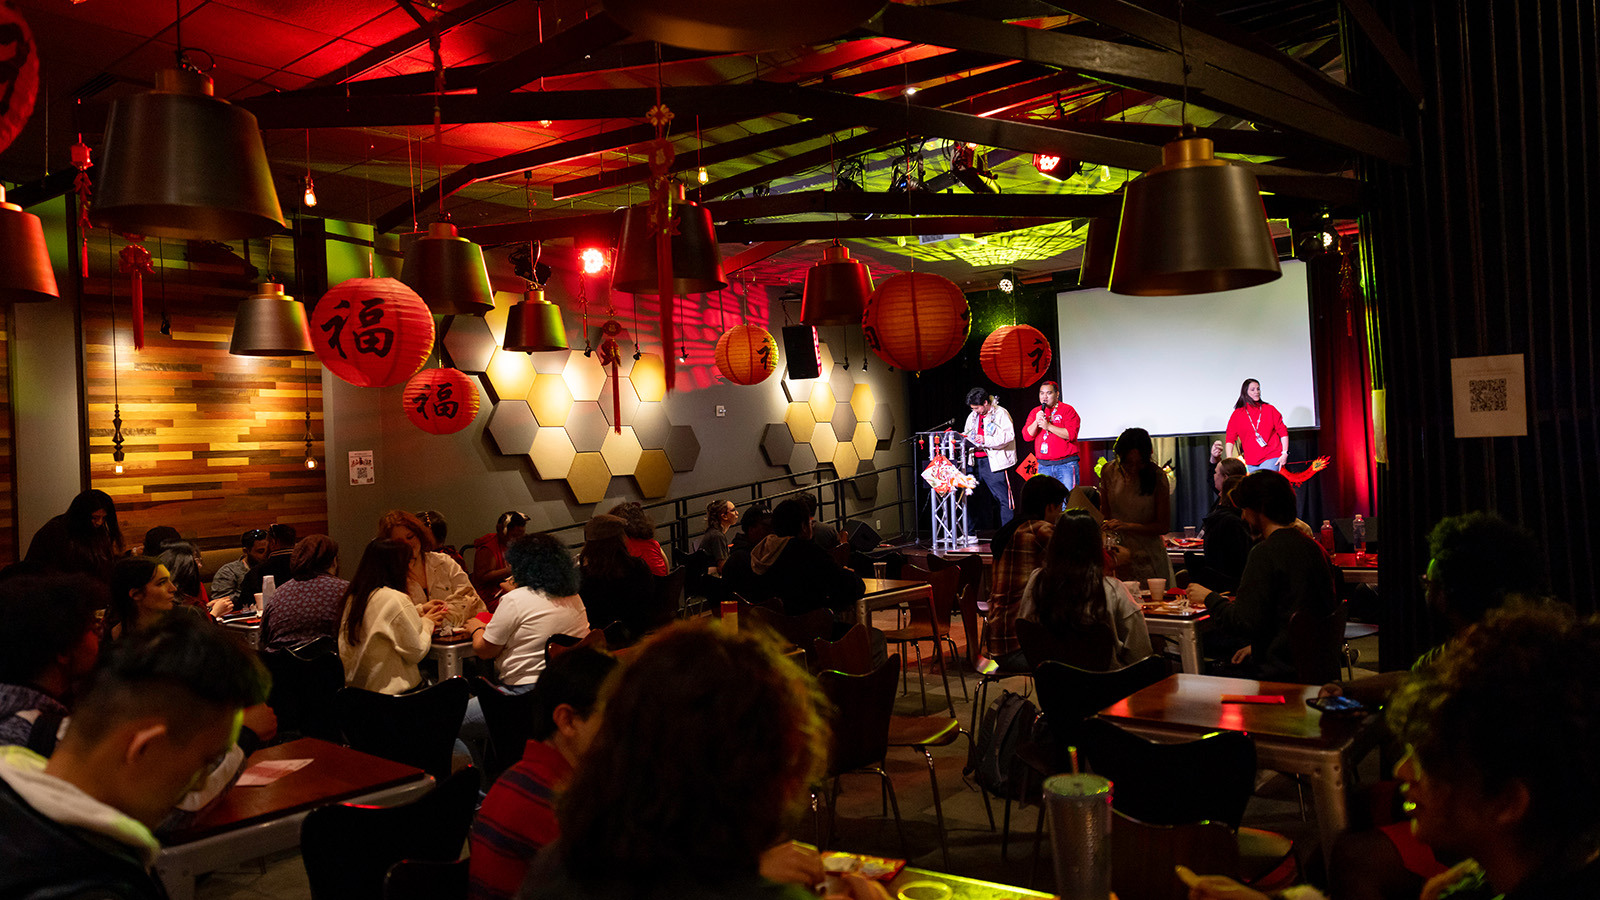 A group gathered at Full Sail's Treehouse, guests sitting down and the hosts on stage. The room is dimly lit and decorated with red paper lanterns for the Lunar New Year.